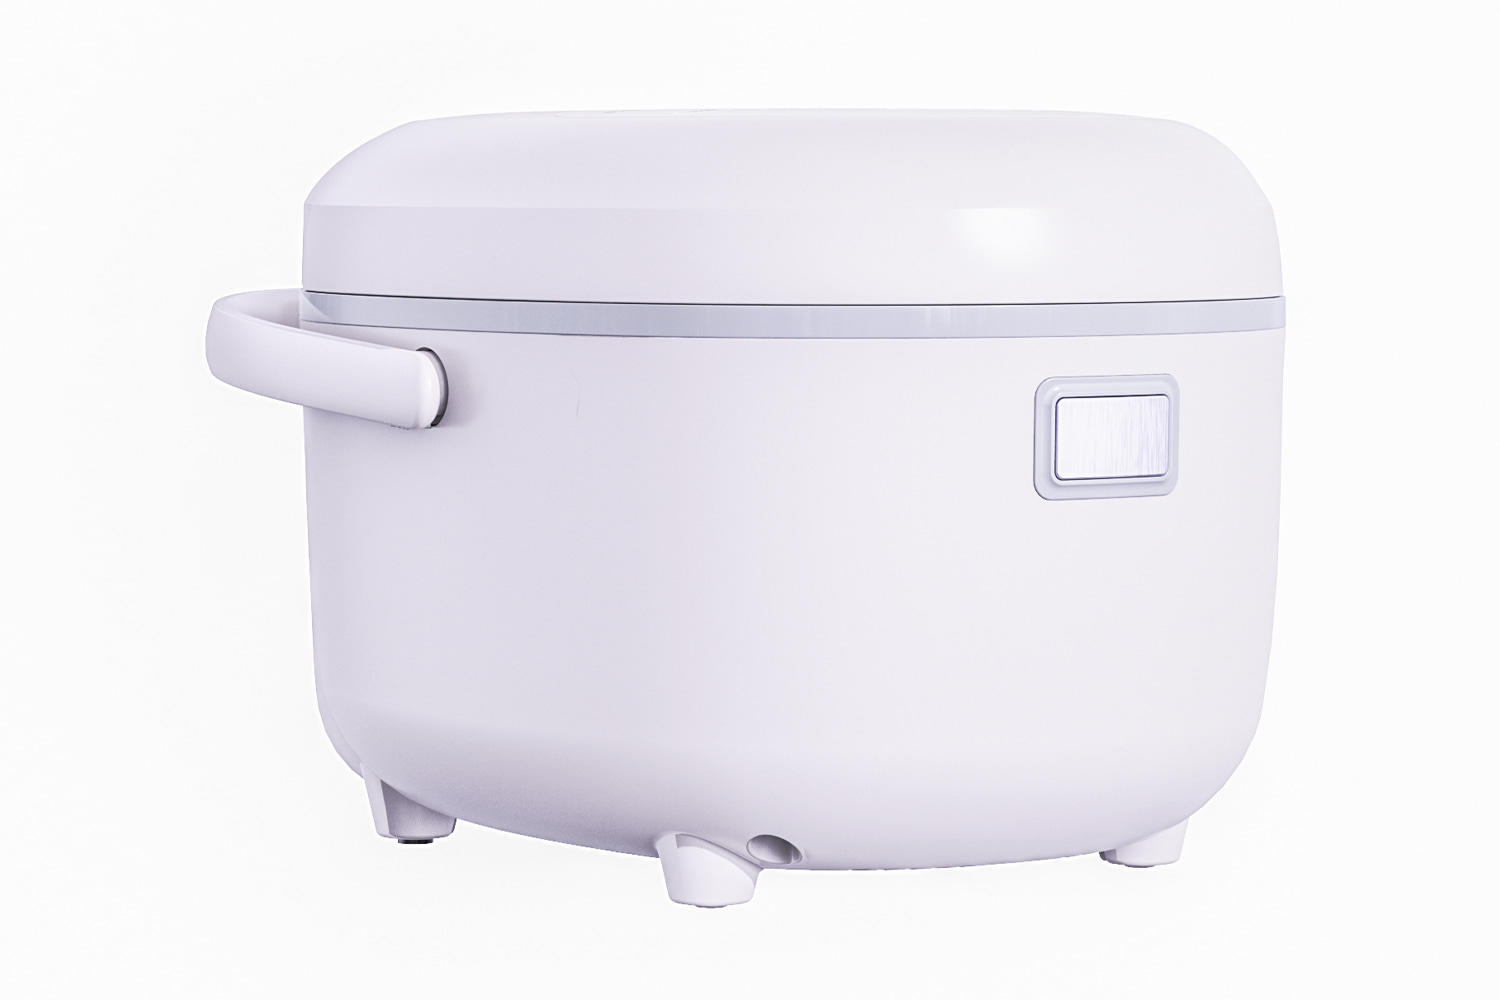 Rice Cooker YDF-20FS01, Multiple menus and cooking modes,smart household